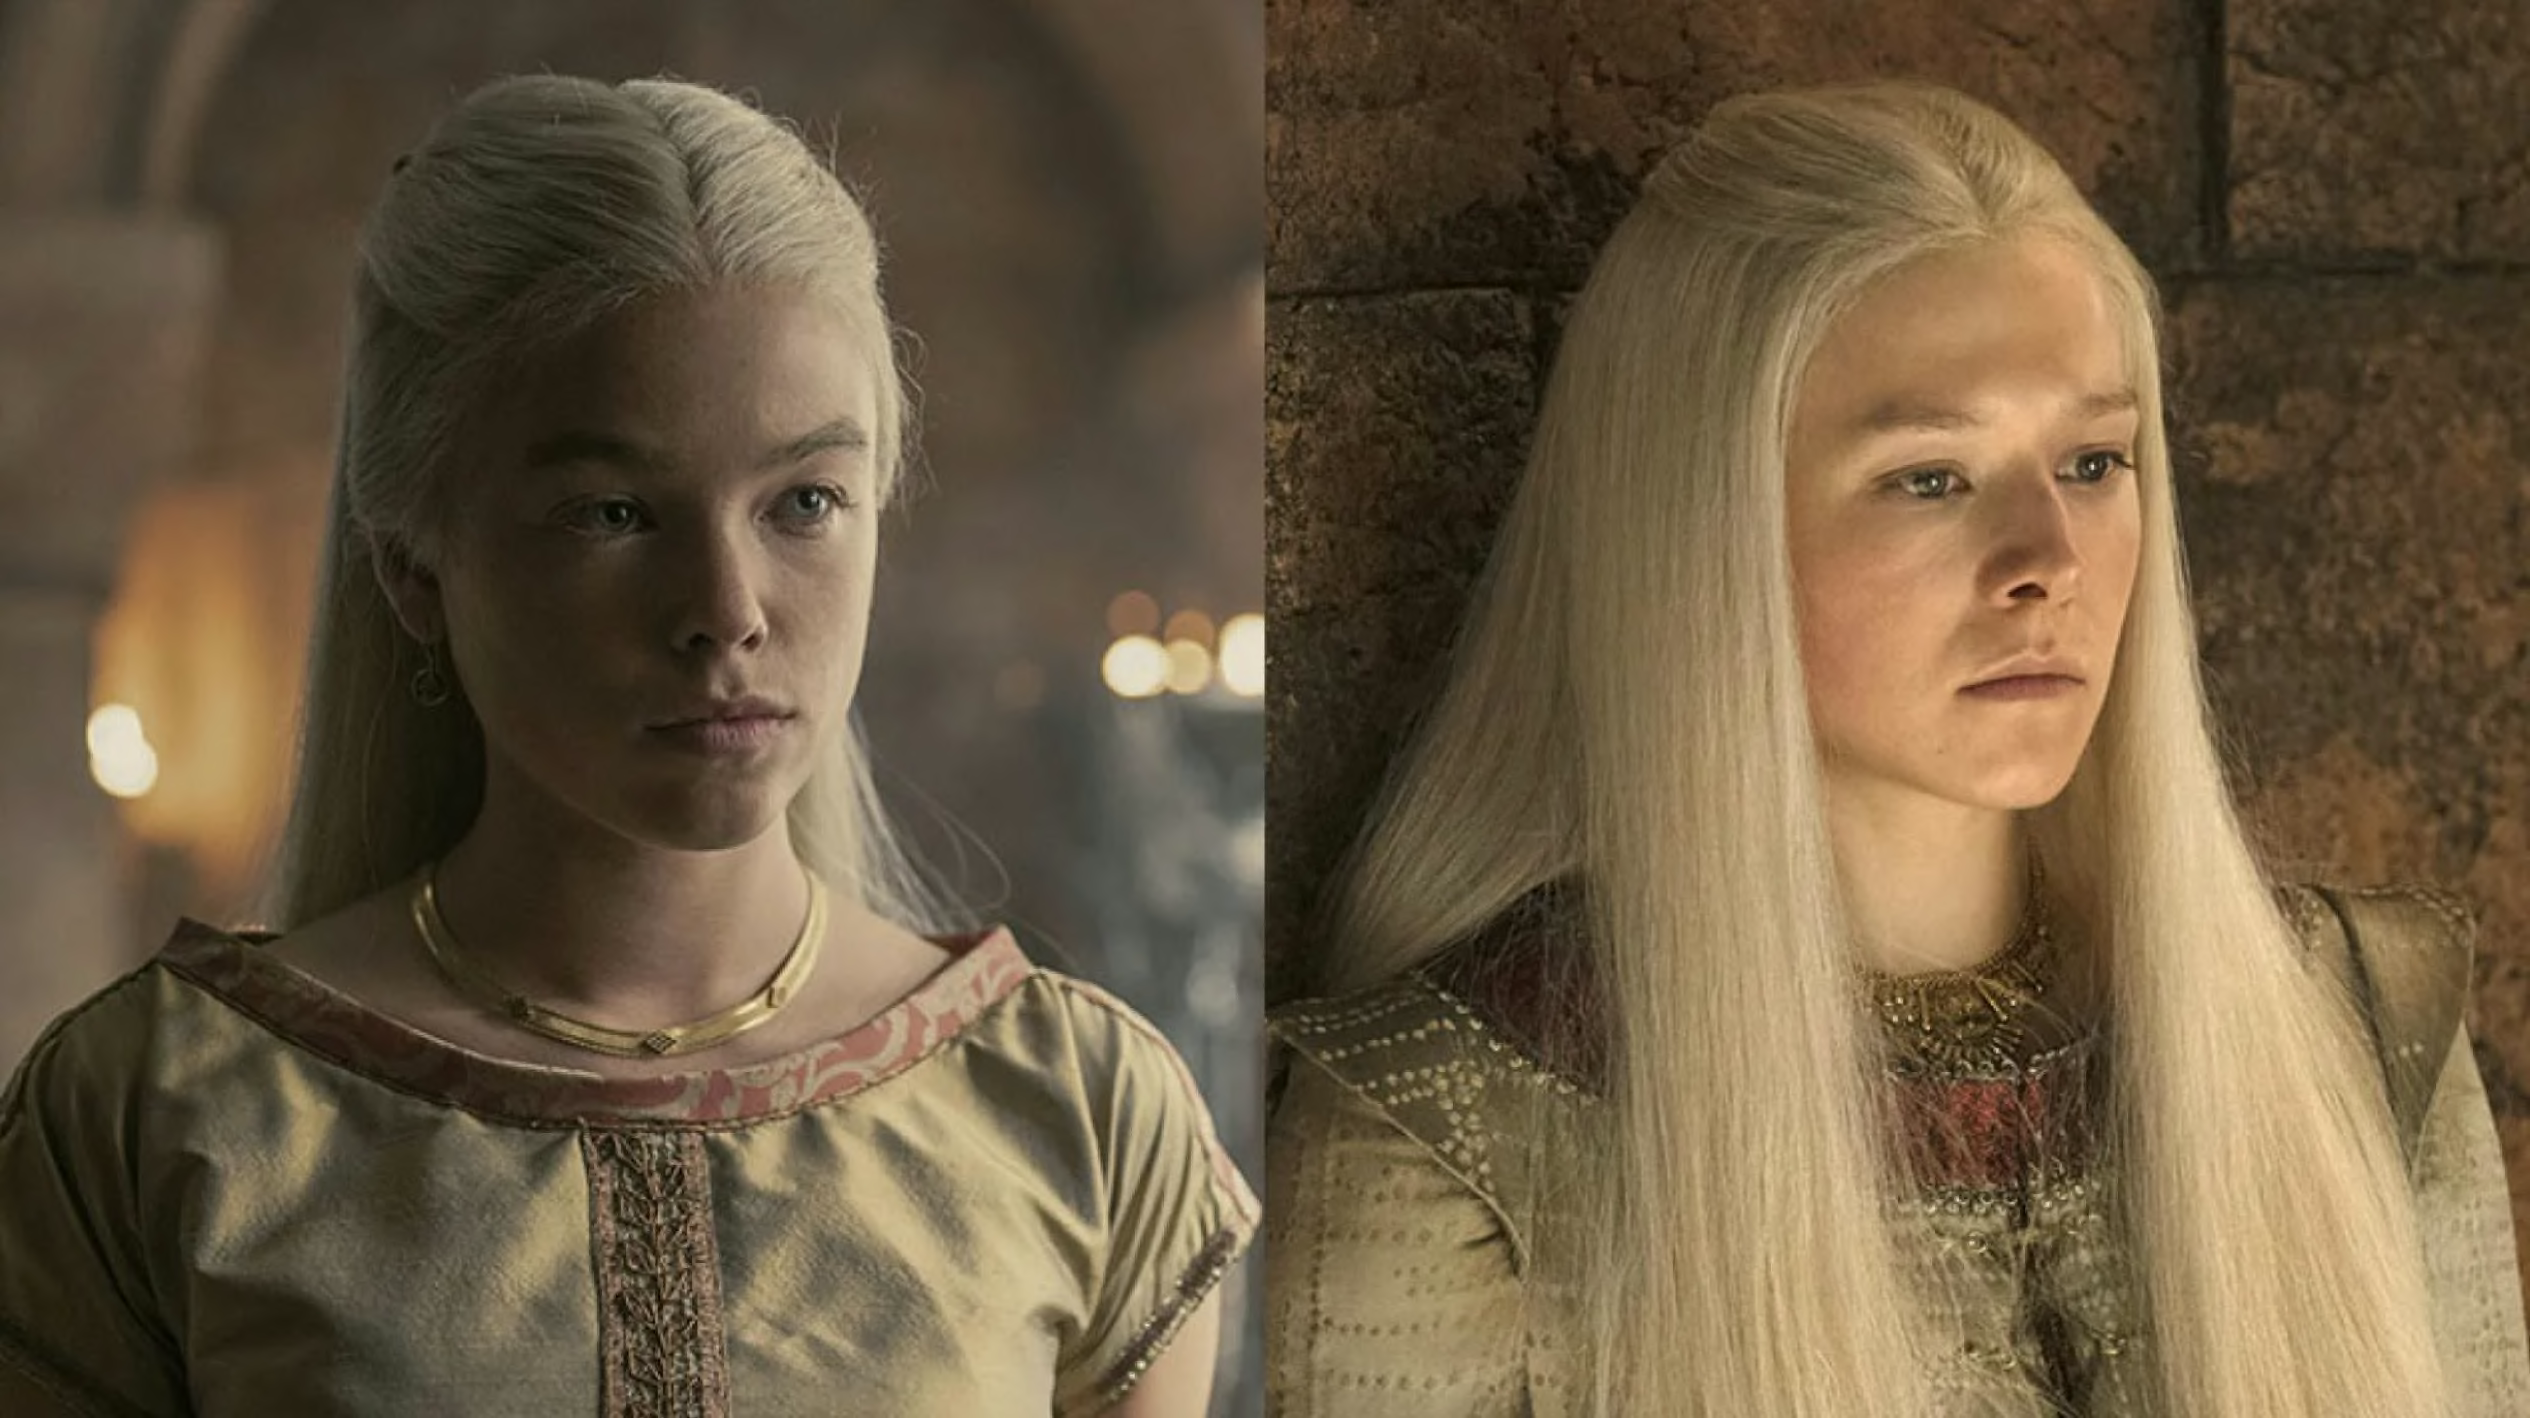 House of the Dragon' Cast: What They Look Like Off Screen